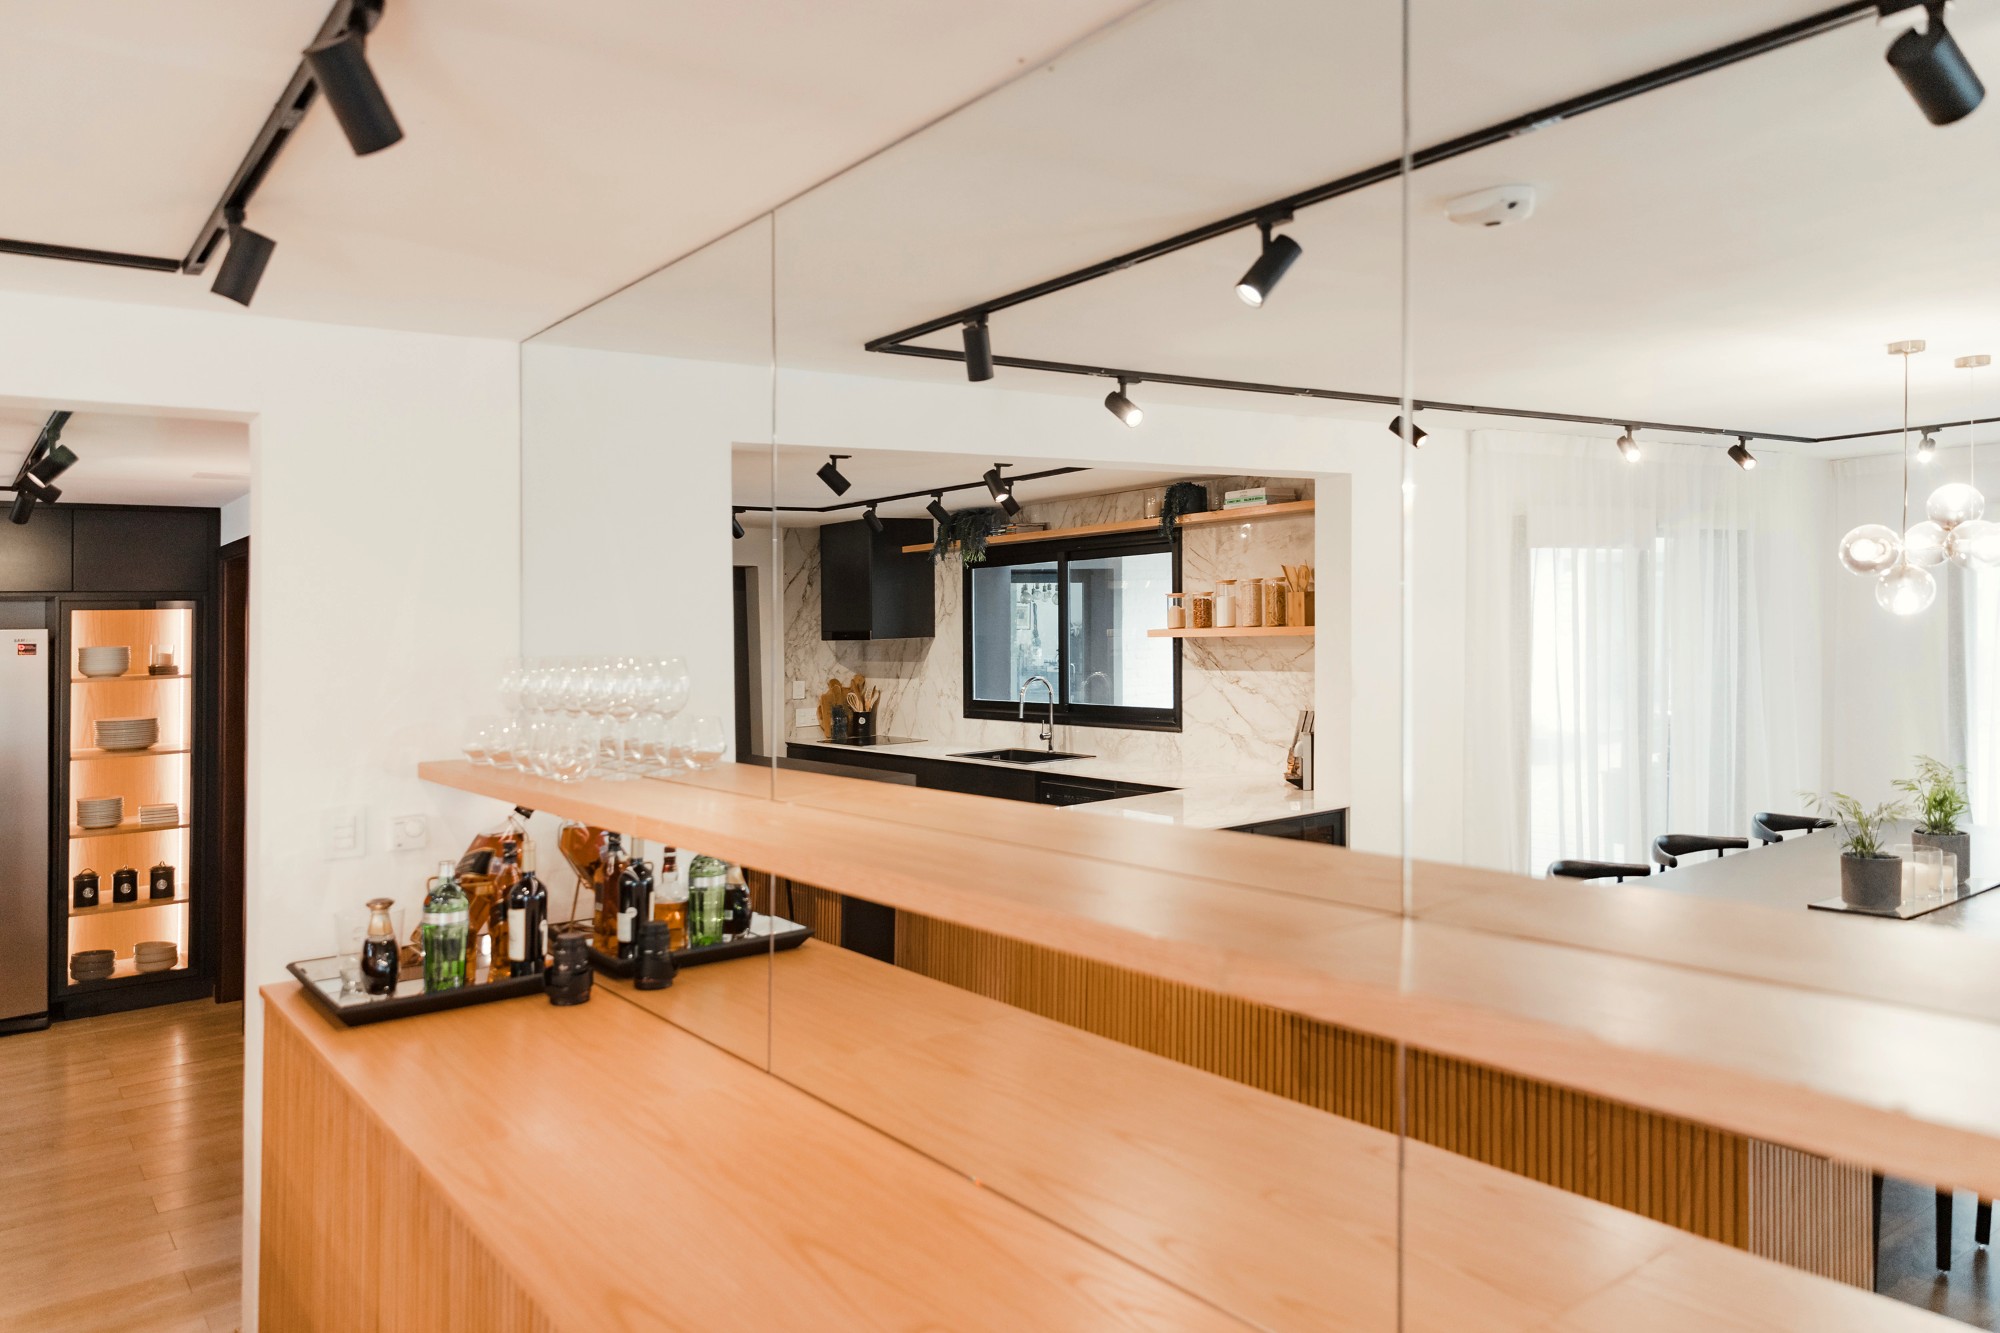 Image 36 of IMG 6677 in Kitchen and dining room merged by a precise design - Cosentino